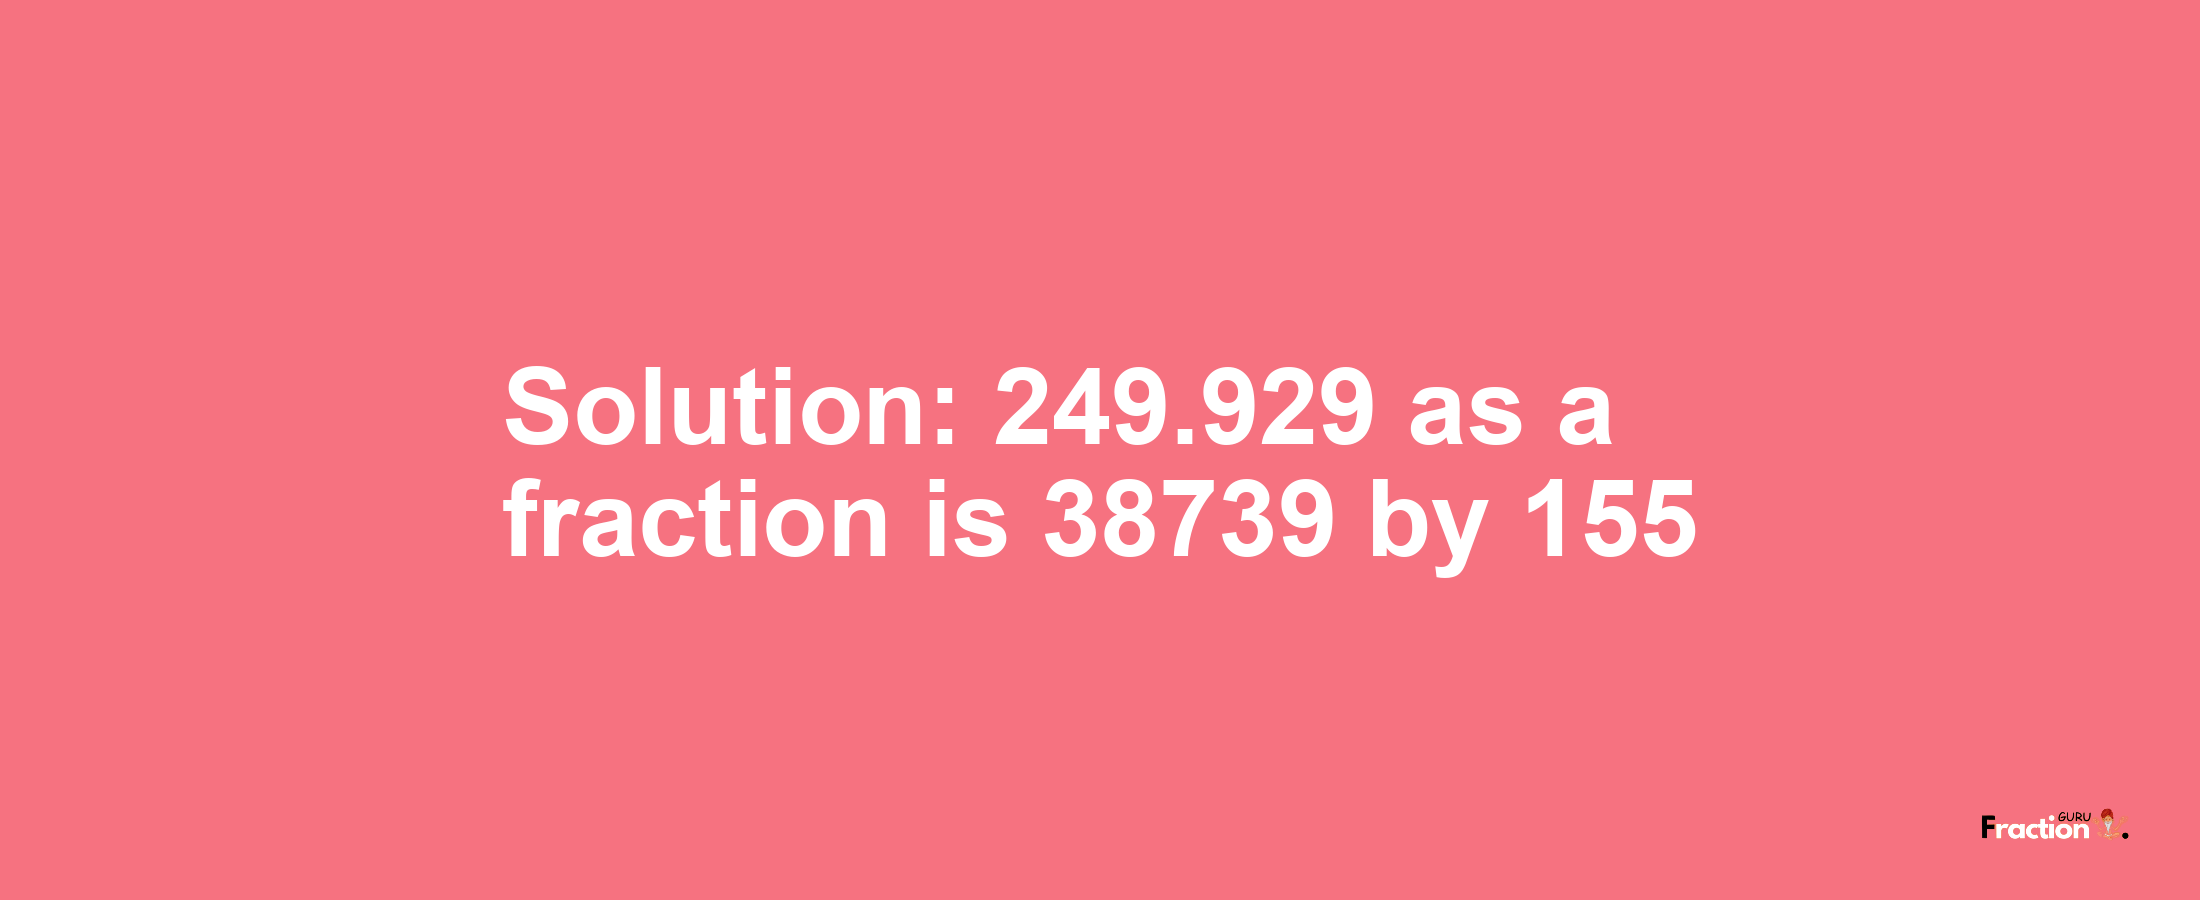 Solution:249.929 as a fraction is 38739/155